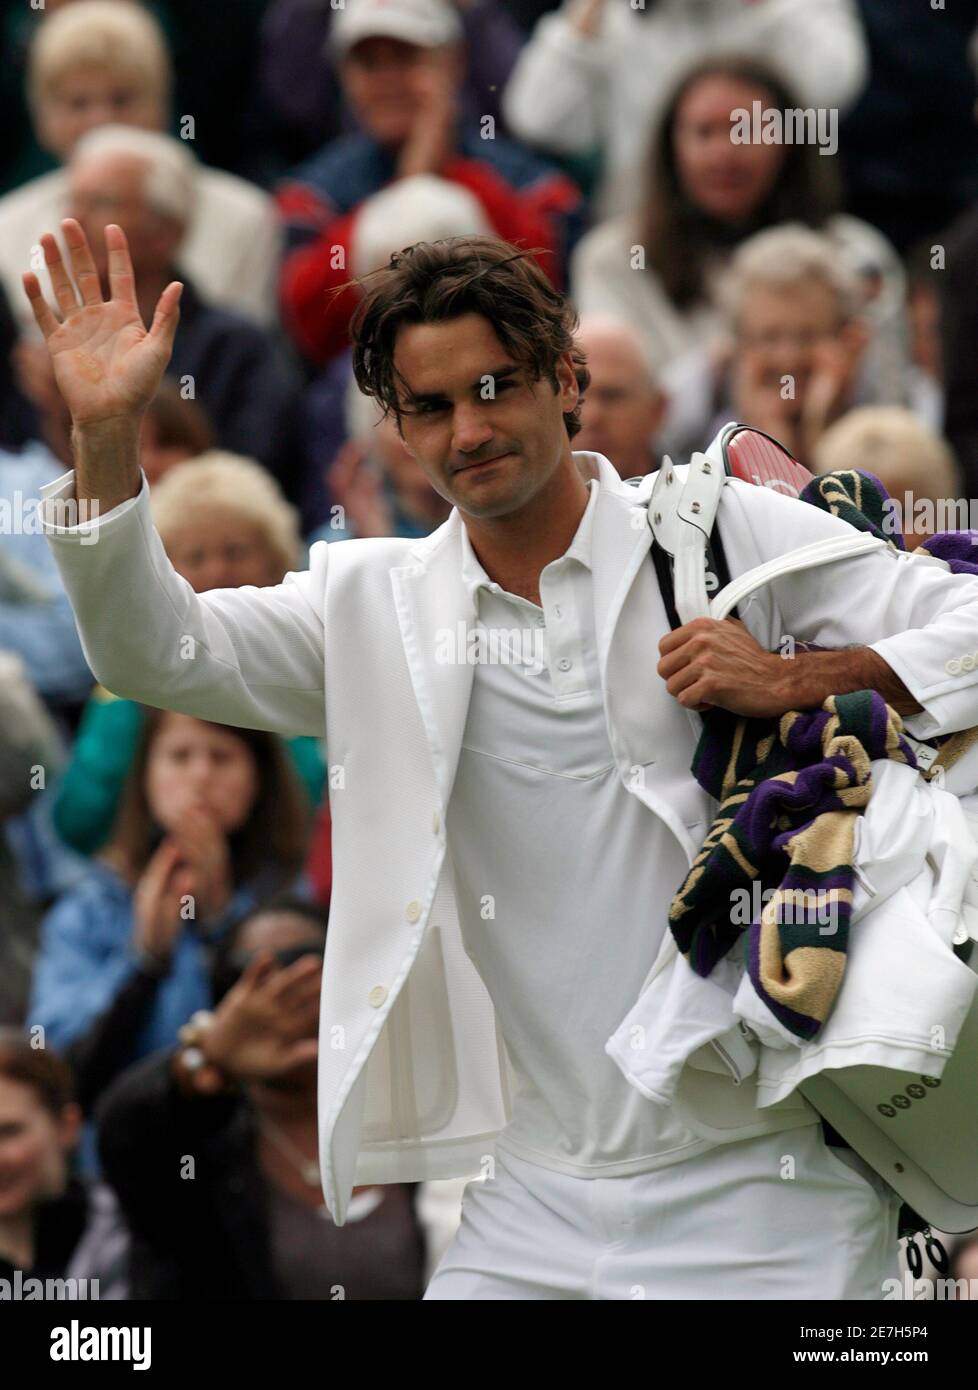 Defending champion Roger Federer of Switzerland waves to the crowd as he walks off centre court  after beating Teimuraz Gabashvili of Russia at the Wimbledon tennis championships in London June 25, 2007.     REUTERS/Eddie Keogh (BRITAIN) Stock Photo